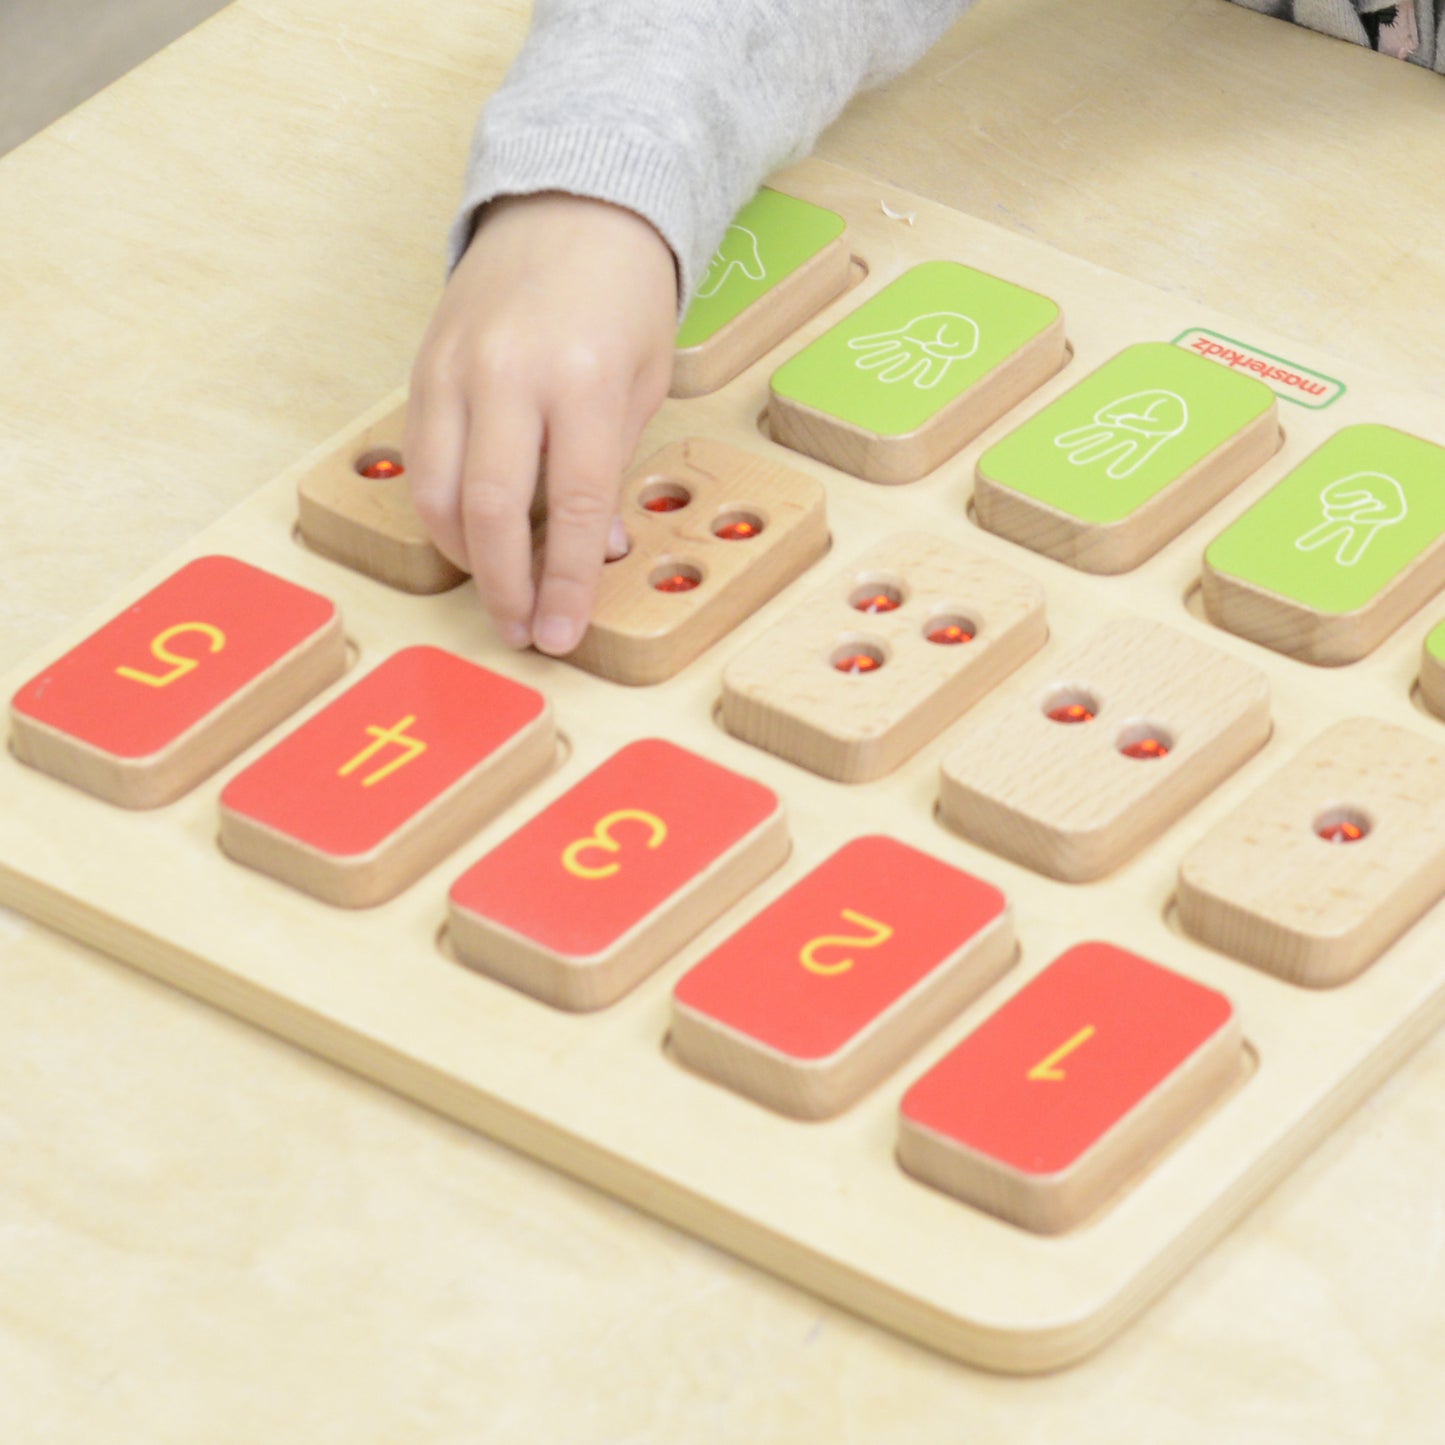 Masterkidz Visual and Tactile 1-5 Learning Board 視覺與觸覺 1-5學習板